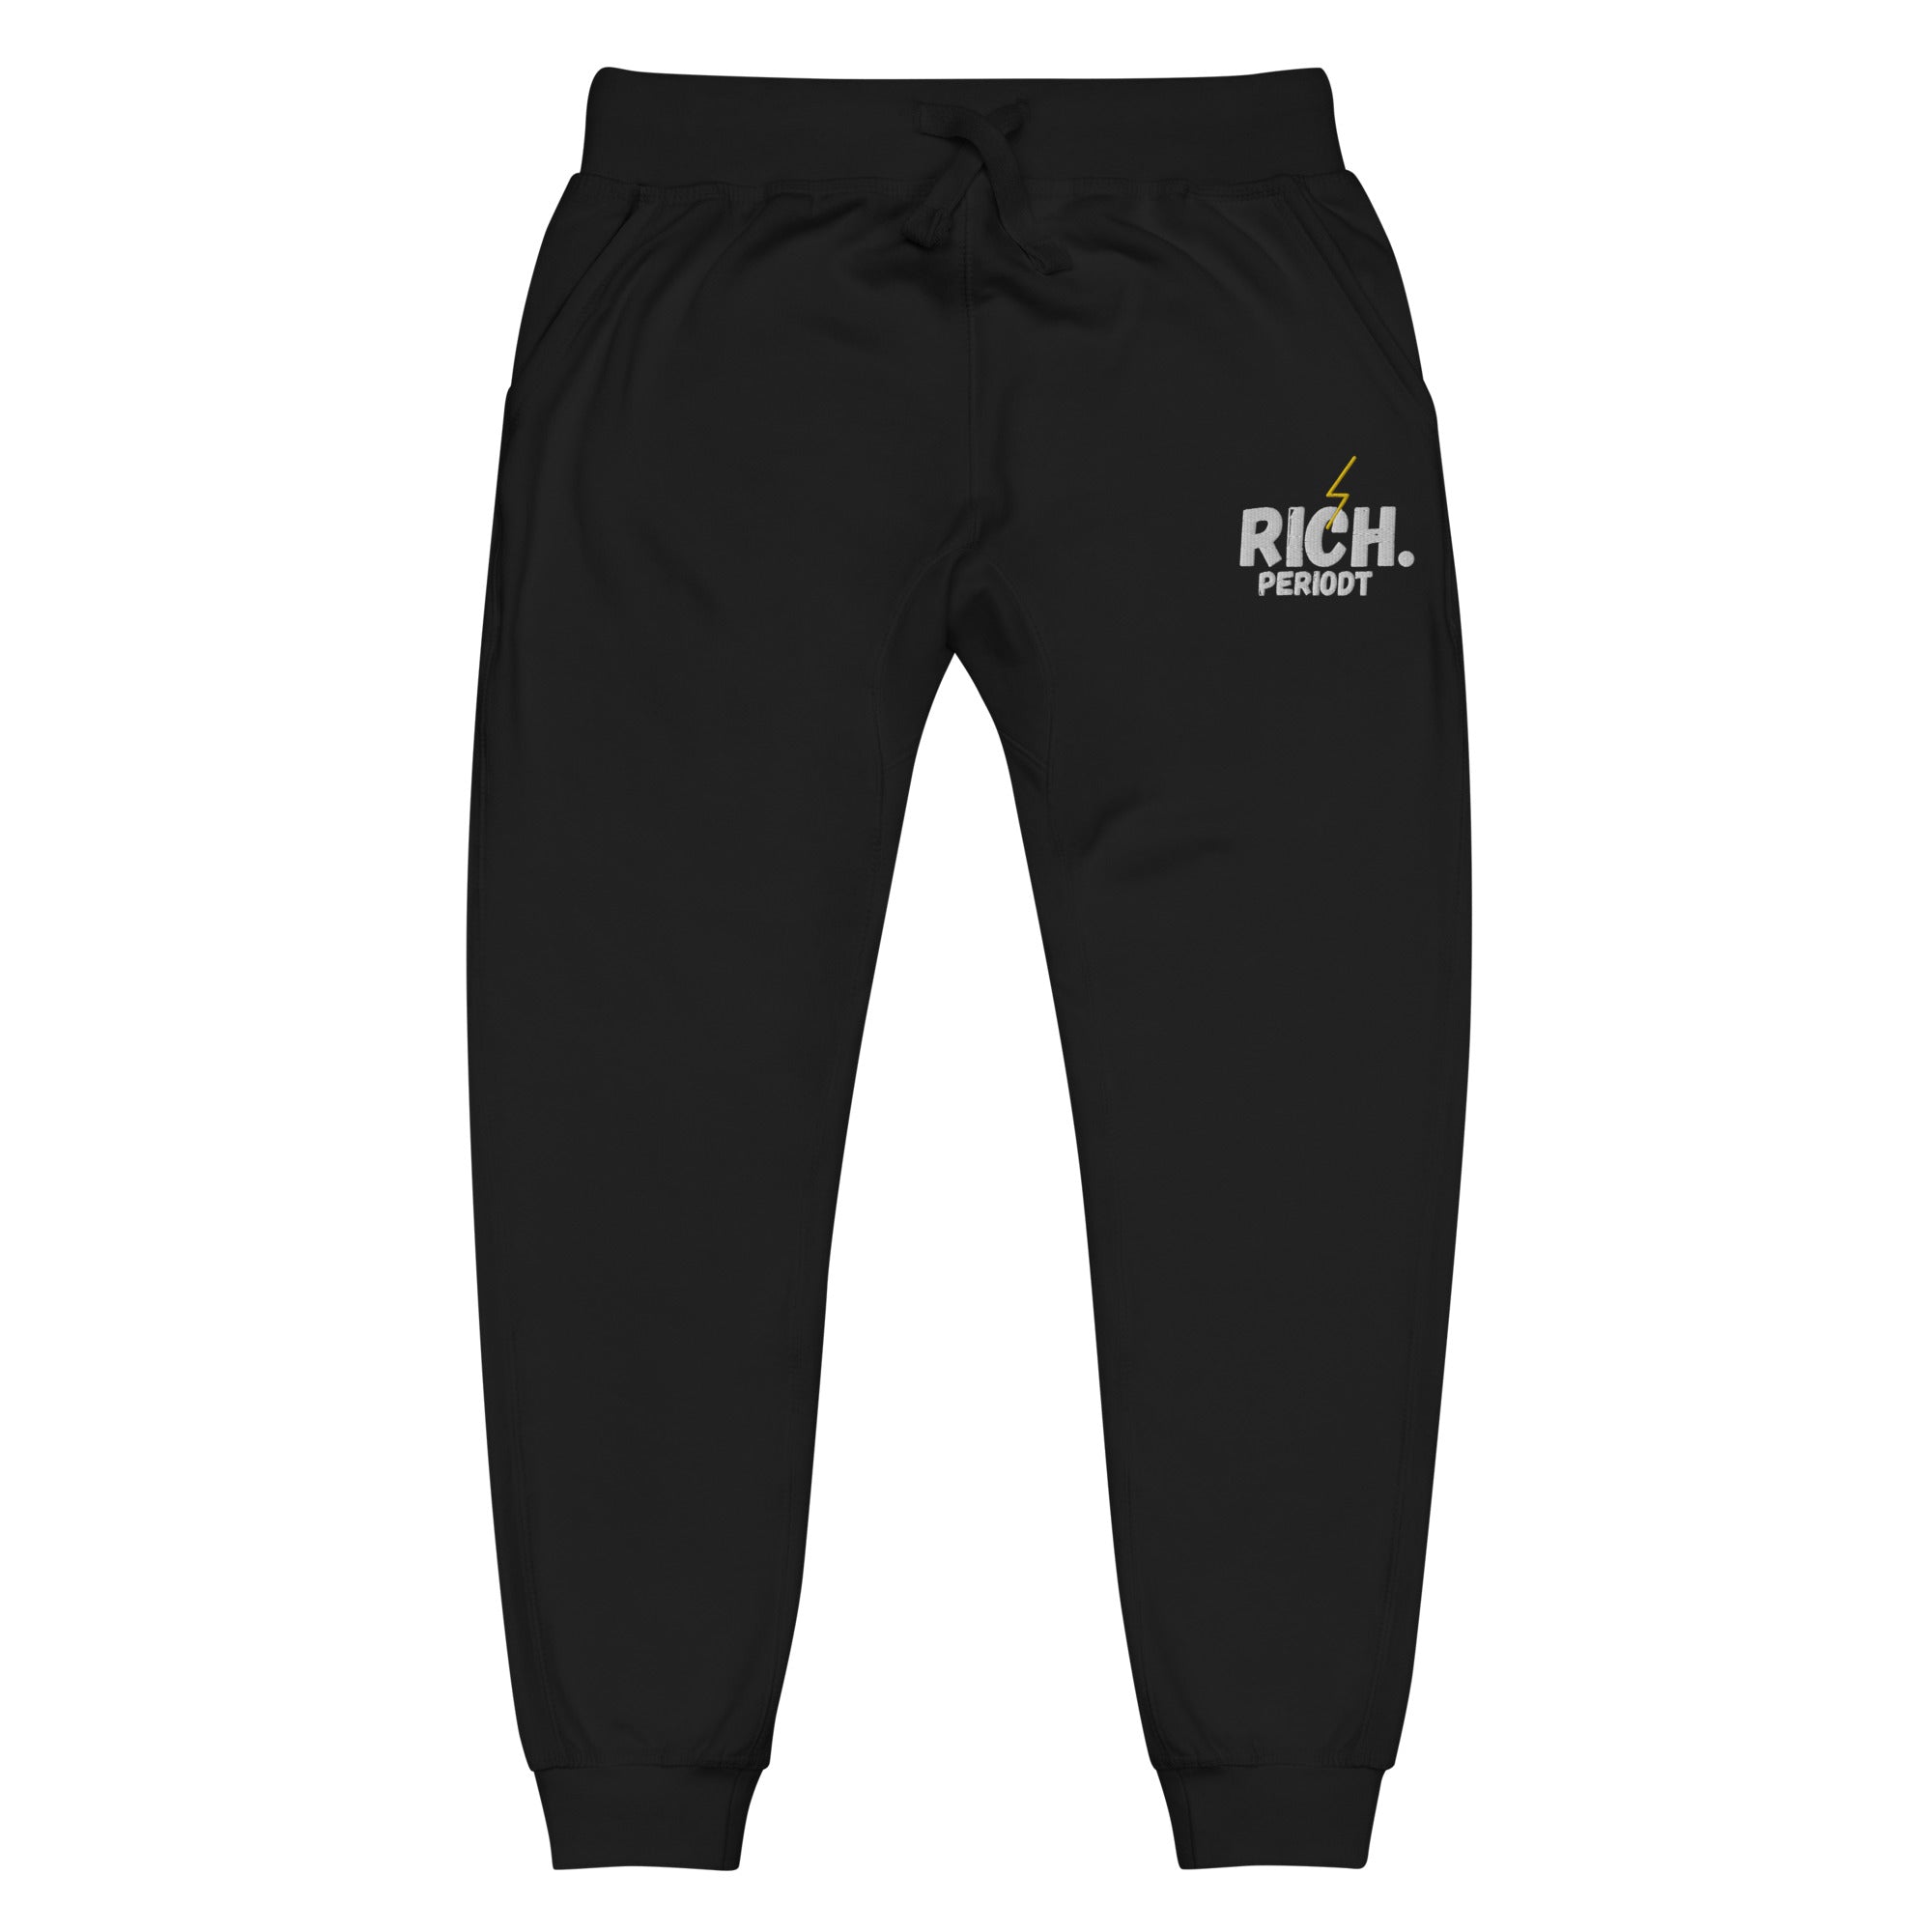 Womens Autumn Casual Sweatpants Drawstring Jogger Sweat Pants Elastic High  Waist Sporty Gym Workout Athletic Fit Trousers